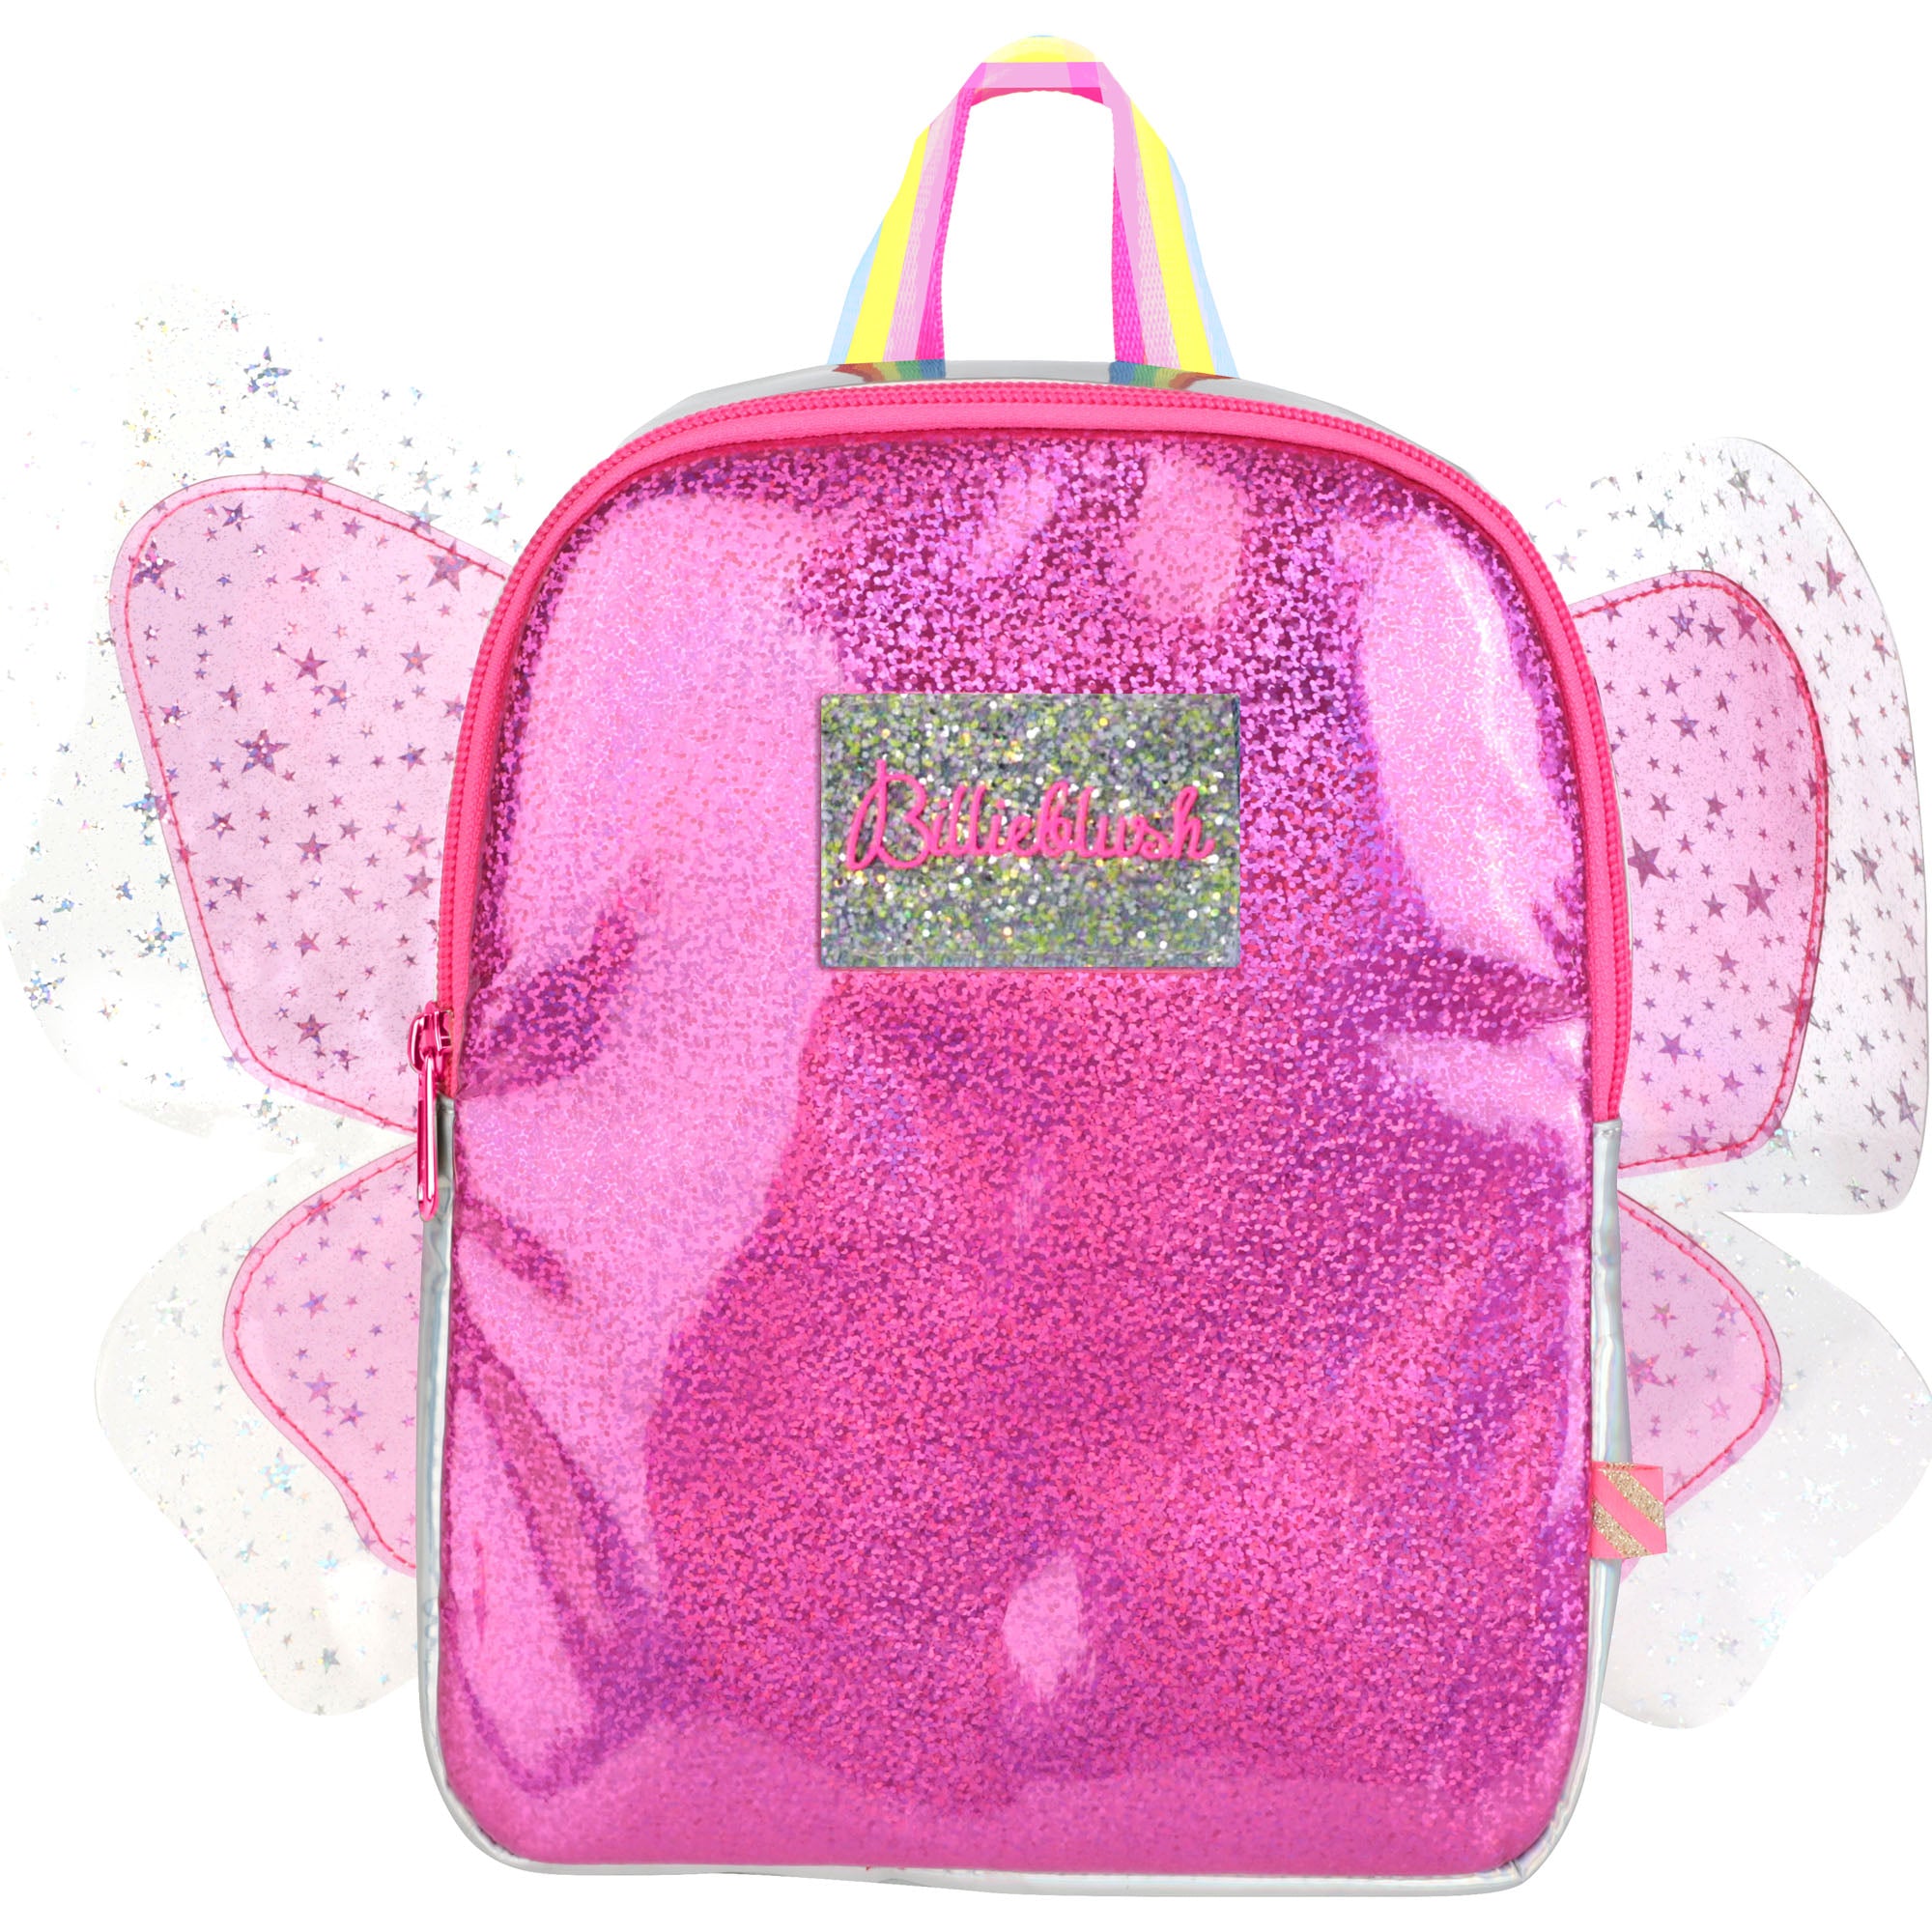 Girls Bright Pink Backpack